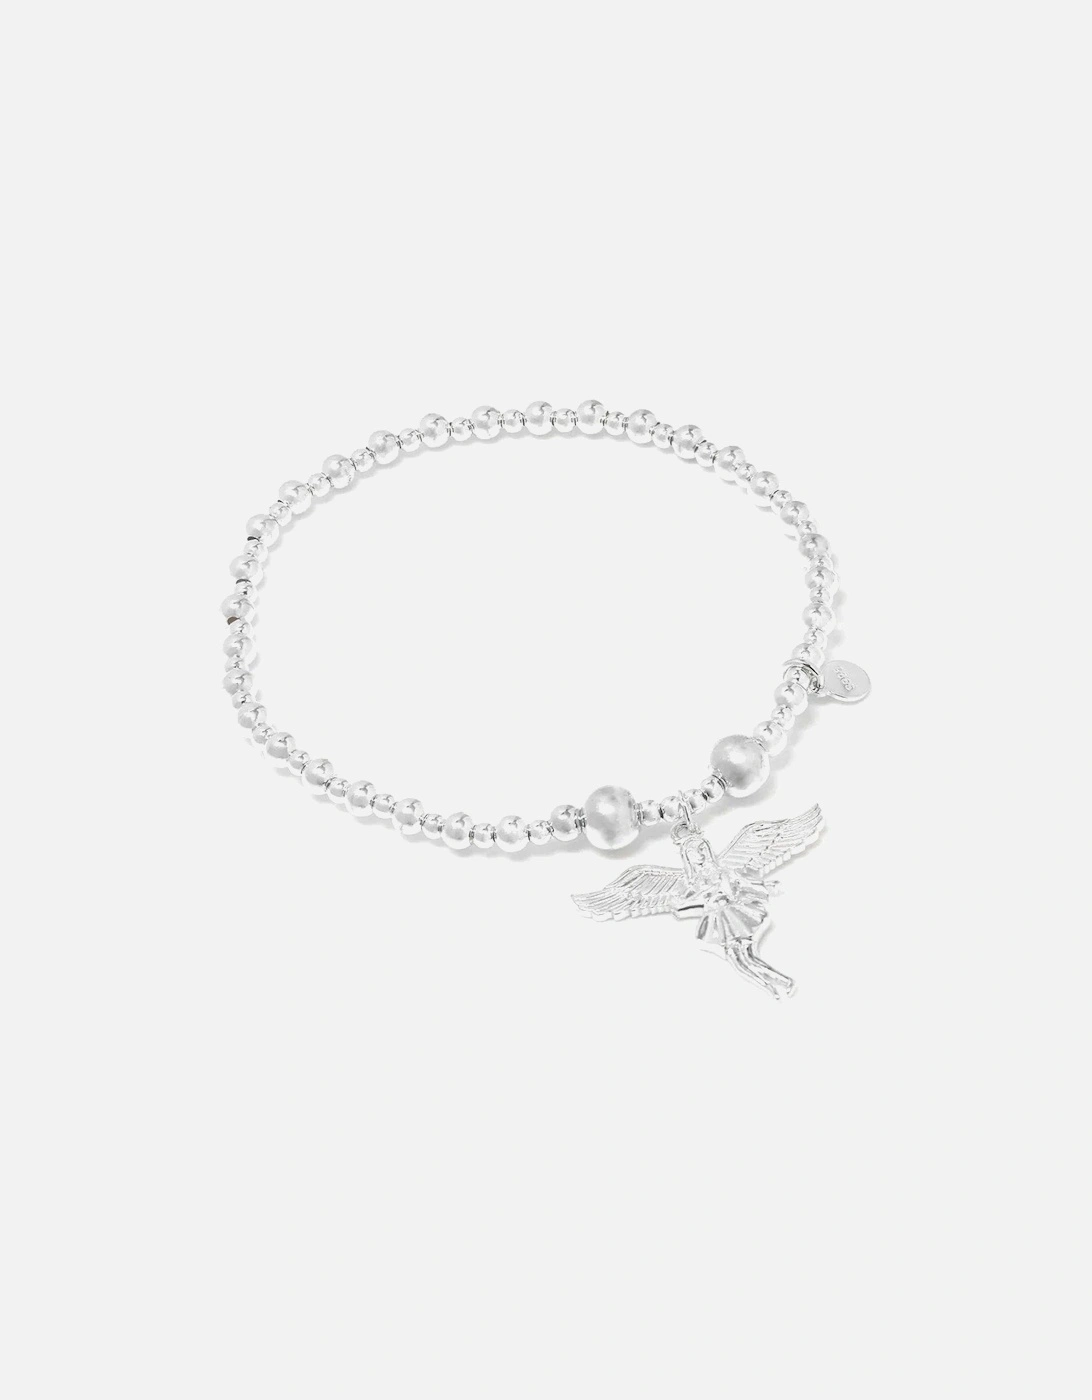 Angle Of Dreams Bracelet - Sterling Silver, 2 of 1